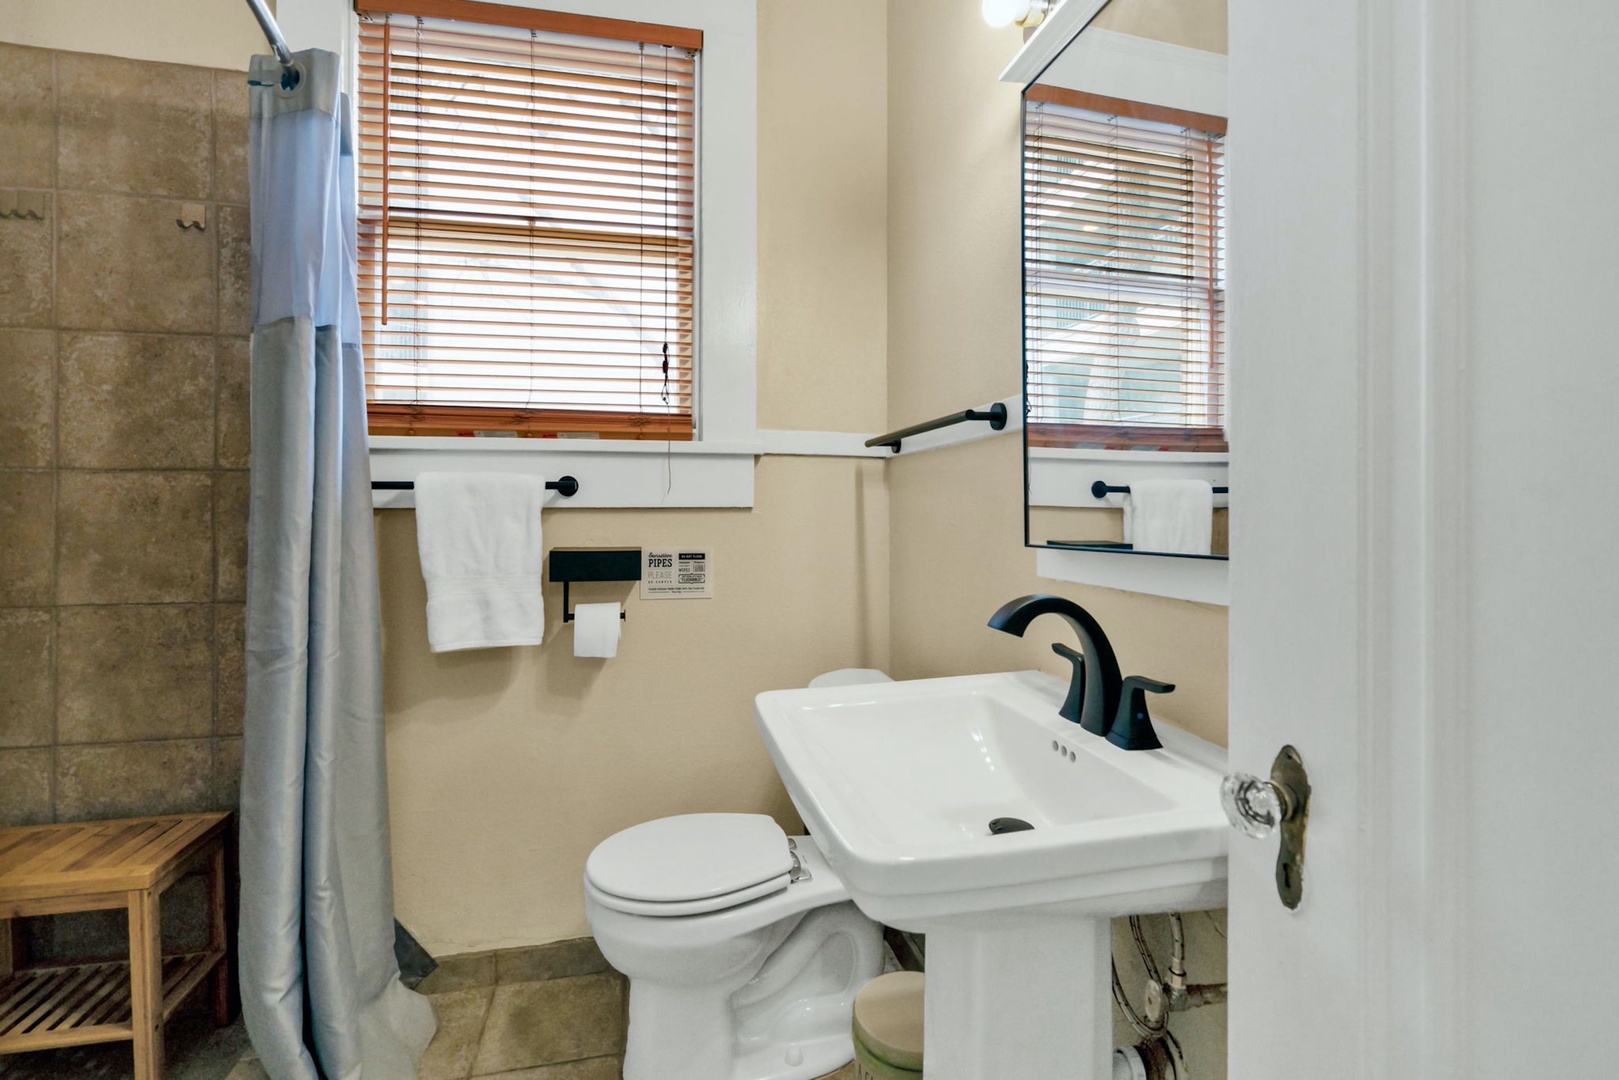 This unit’s full bathroom features a pedestal sink & walk-in shower